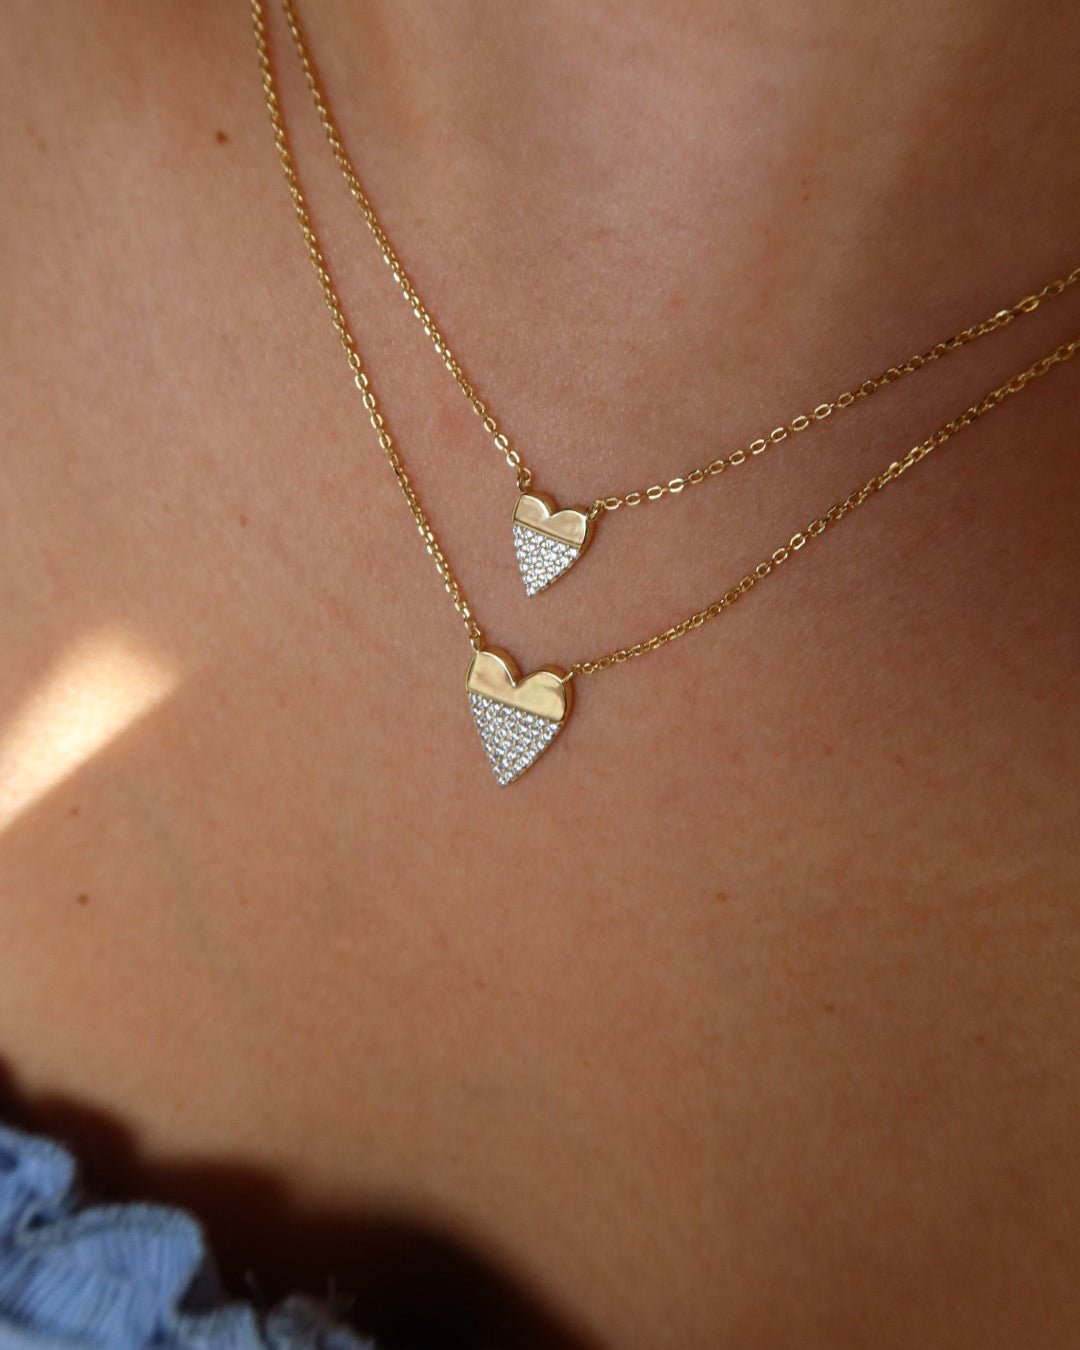 OLYMPIA HALF DIPPED HEART NECKLACE - Shop Cupcakes and Cashmere